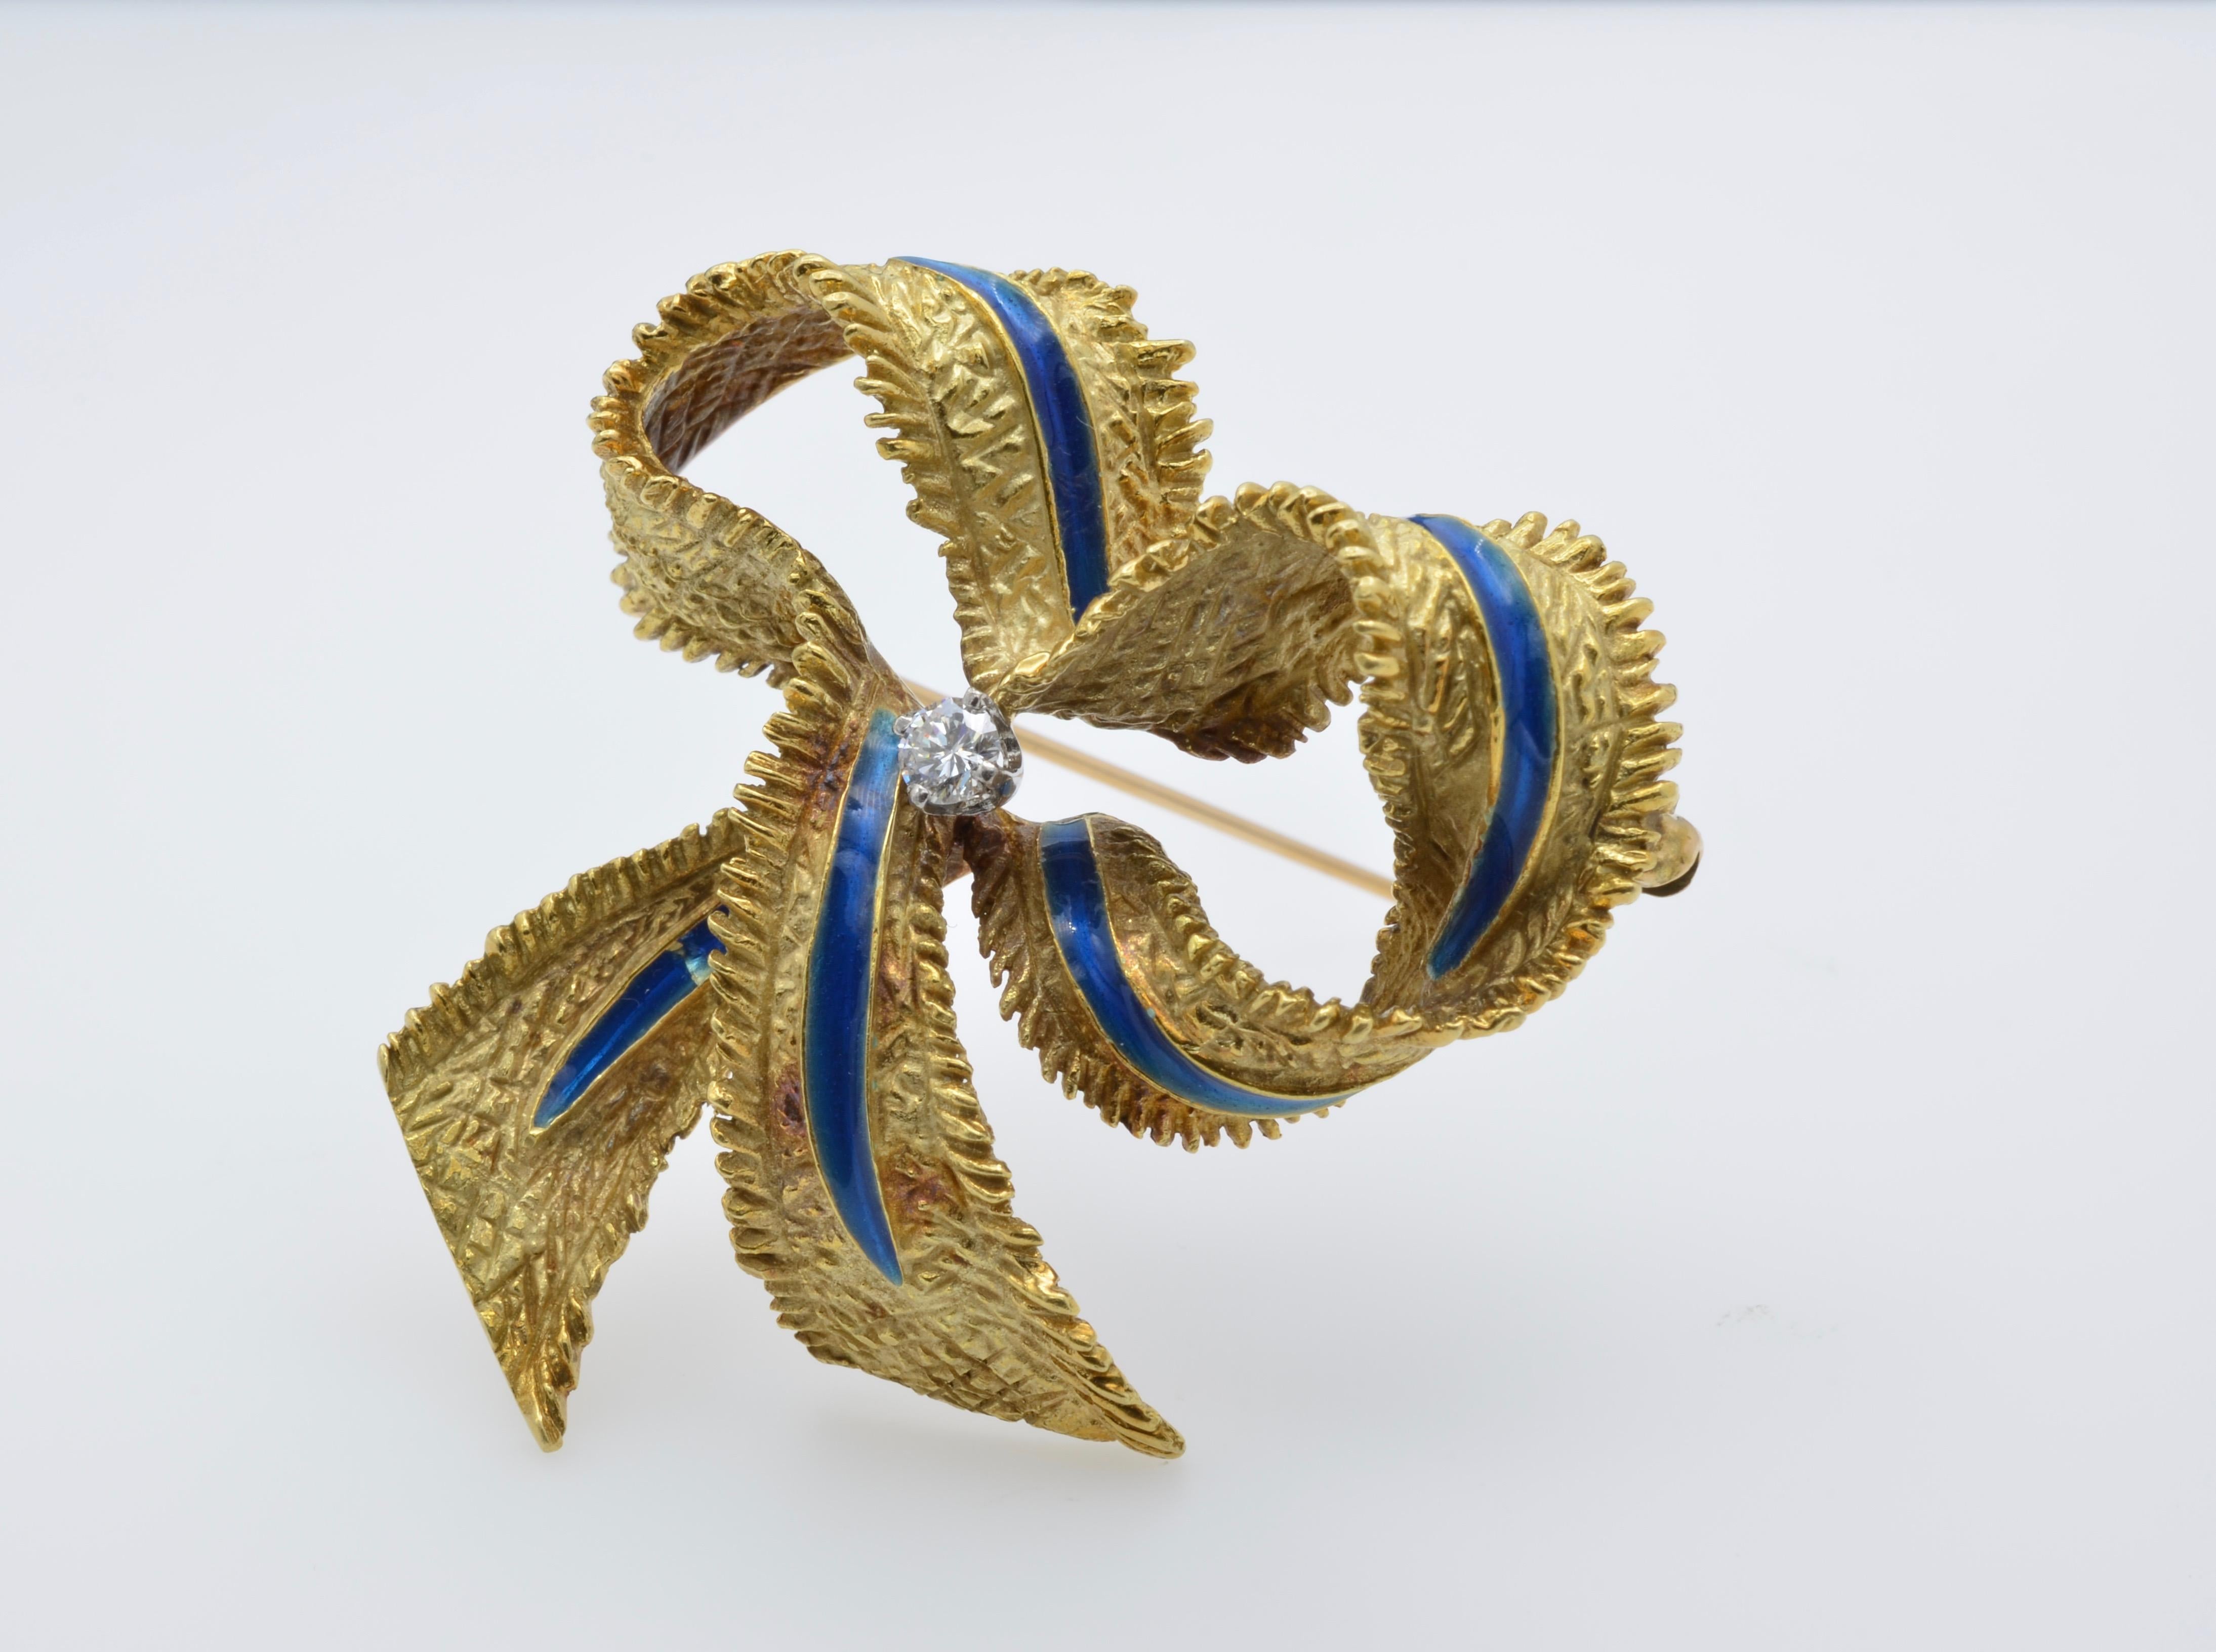 Iconic Ribbon from Tiffany with blue enamel, 18K yellow gold, and a central diamond. The diamond is 0.15cts and color GH VS2. It has elegant exquisite texture and beautiful contrast with the a blue line of enamel on every curve and a gorgeous center